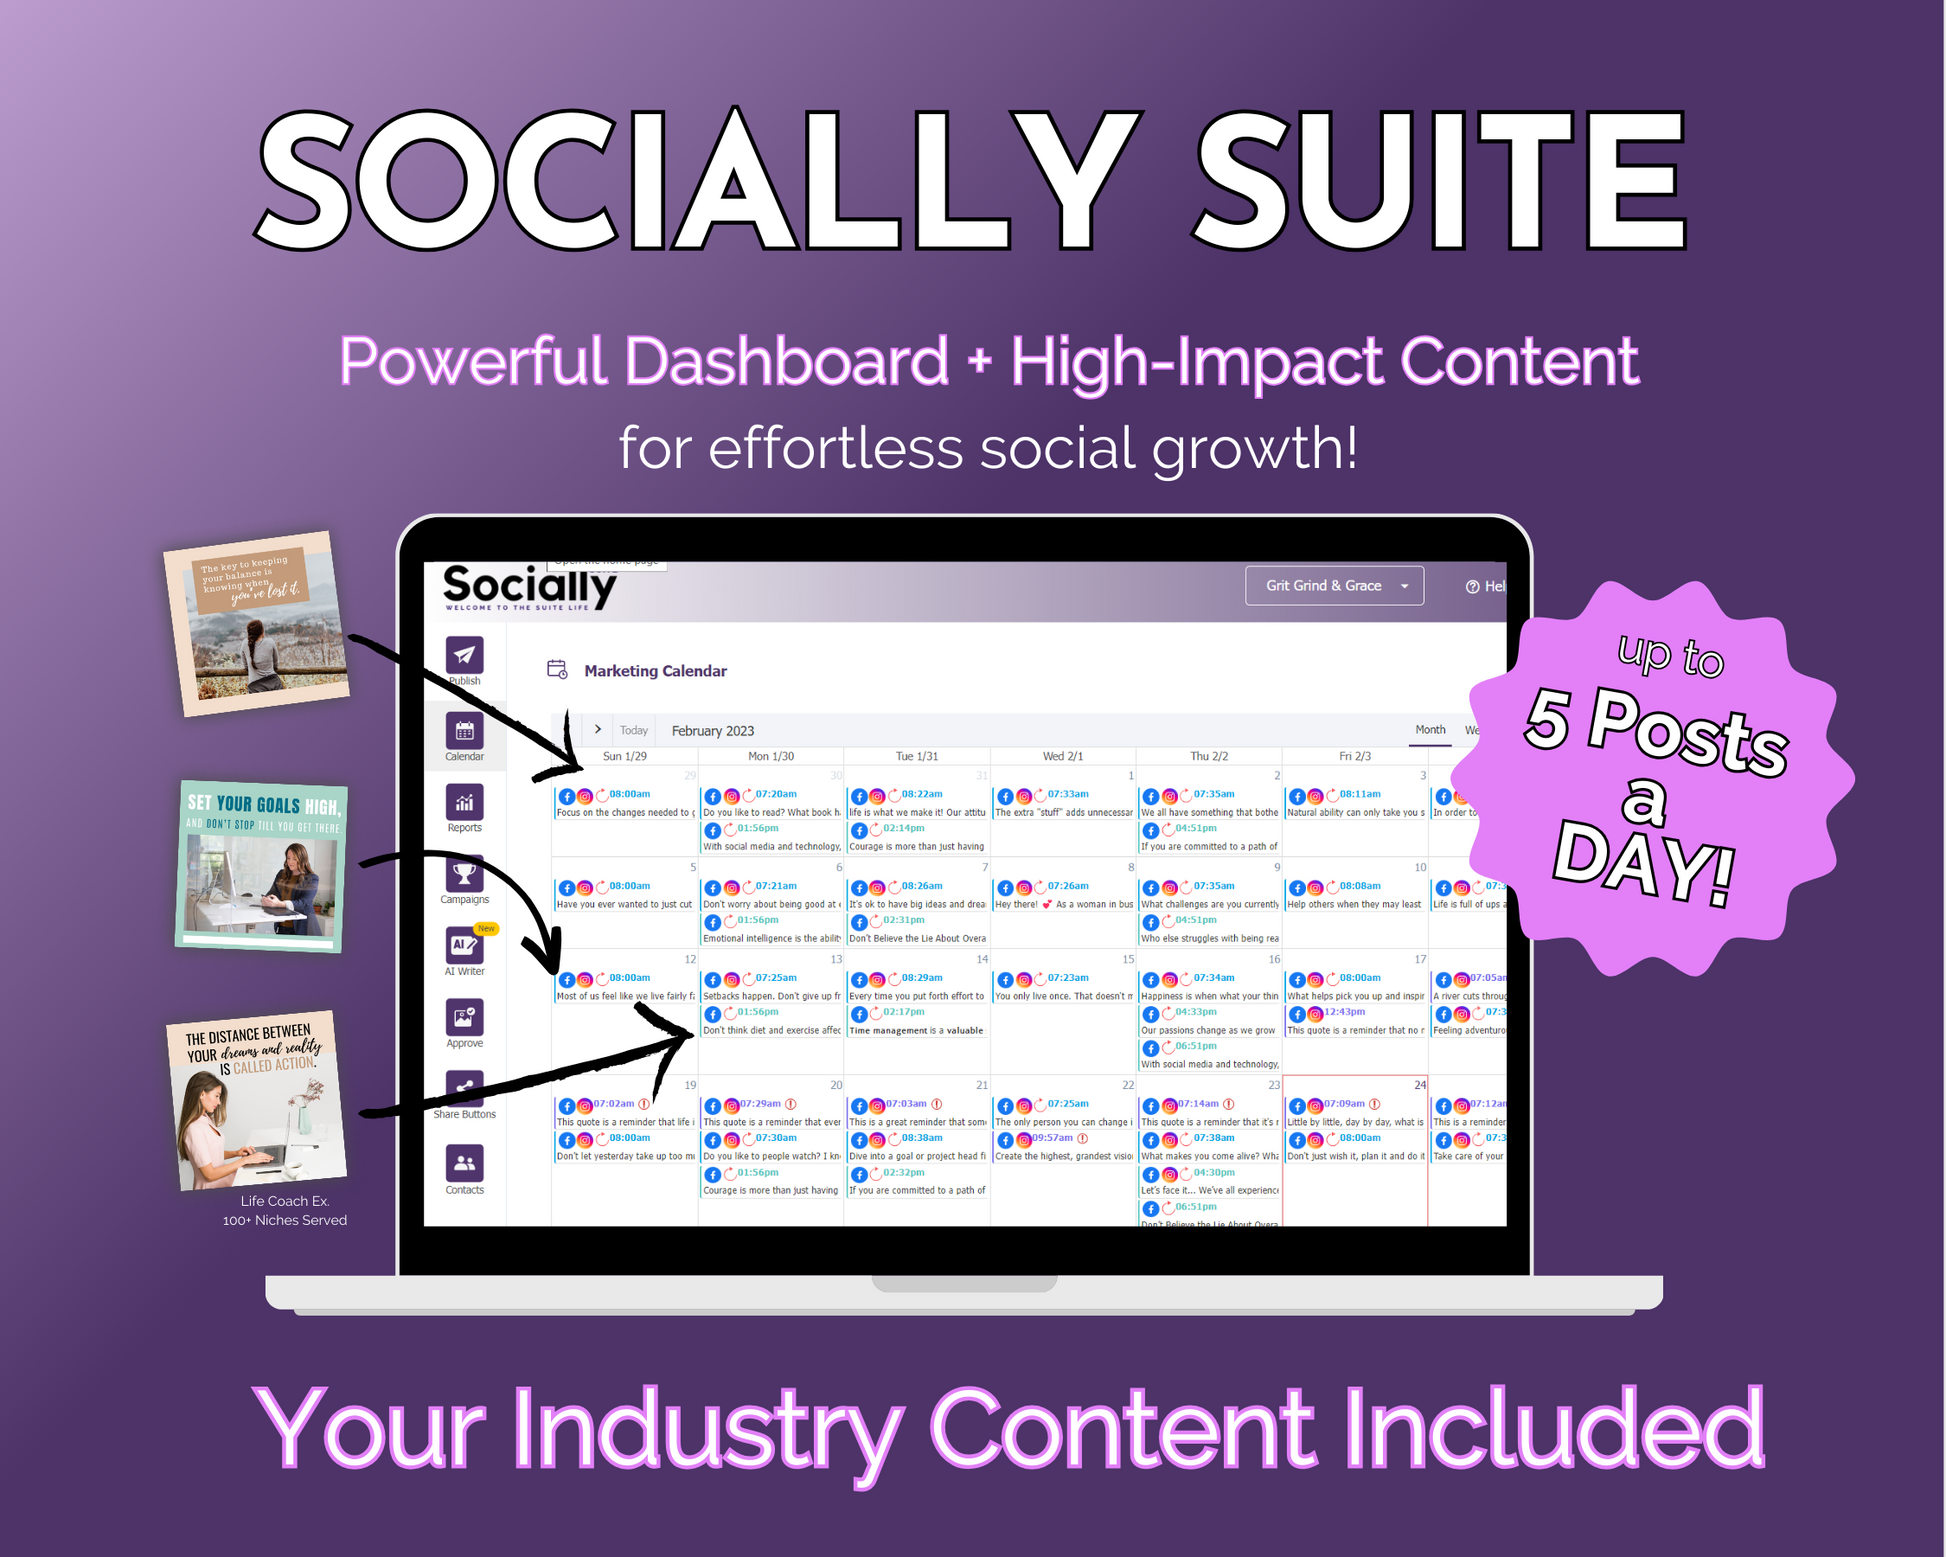 Get Socially Inclined's Socially Suite Membership is a powerful dashboard for social media marketing, offering high content management capabilities.